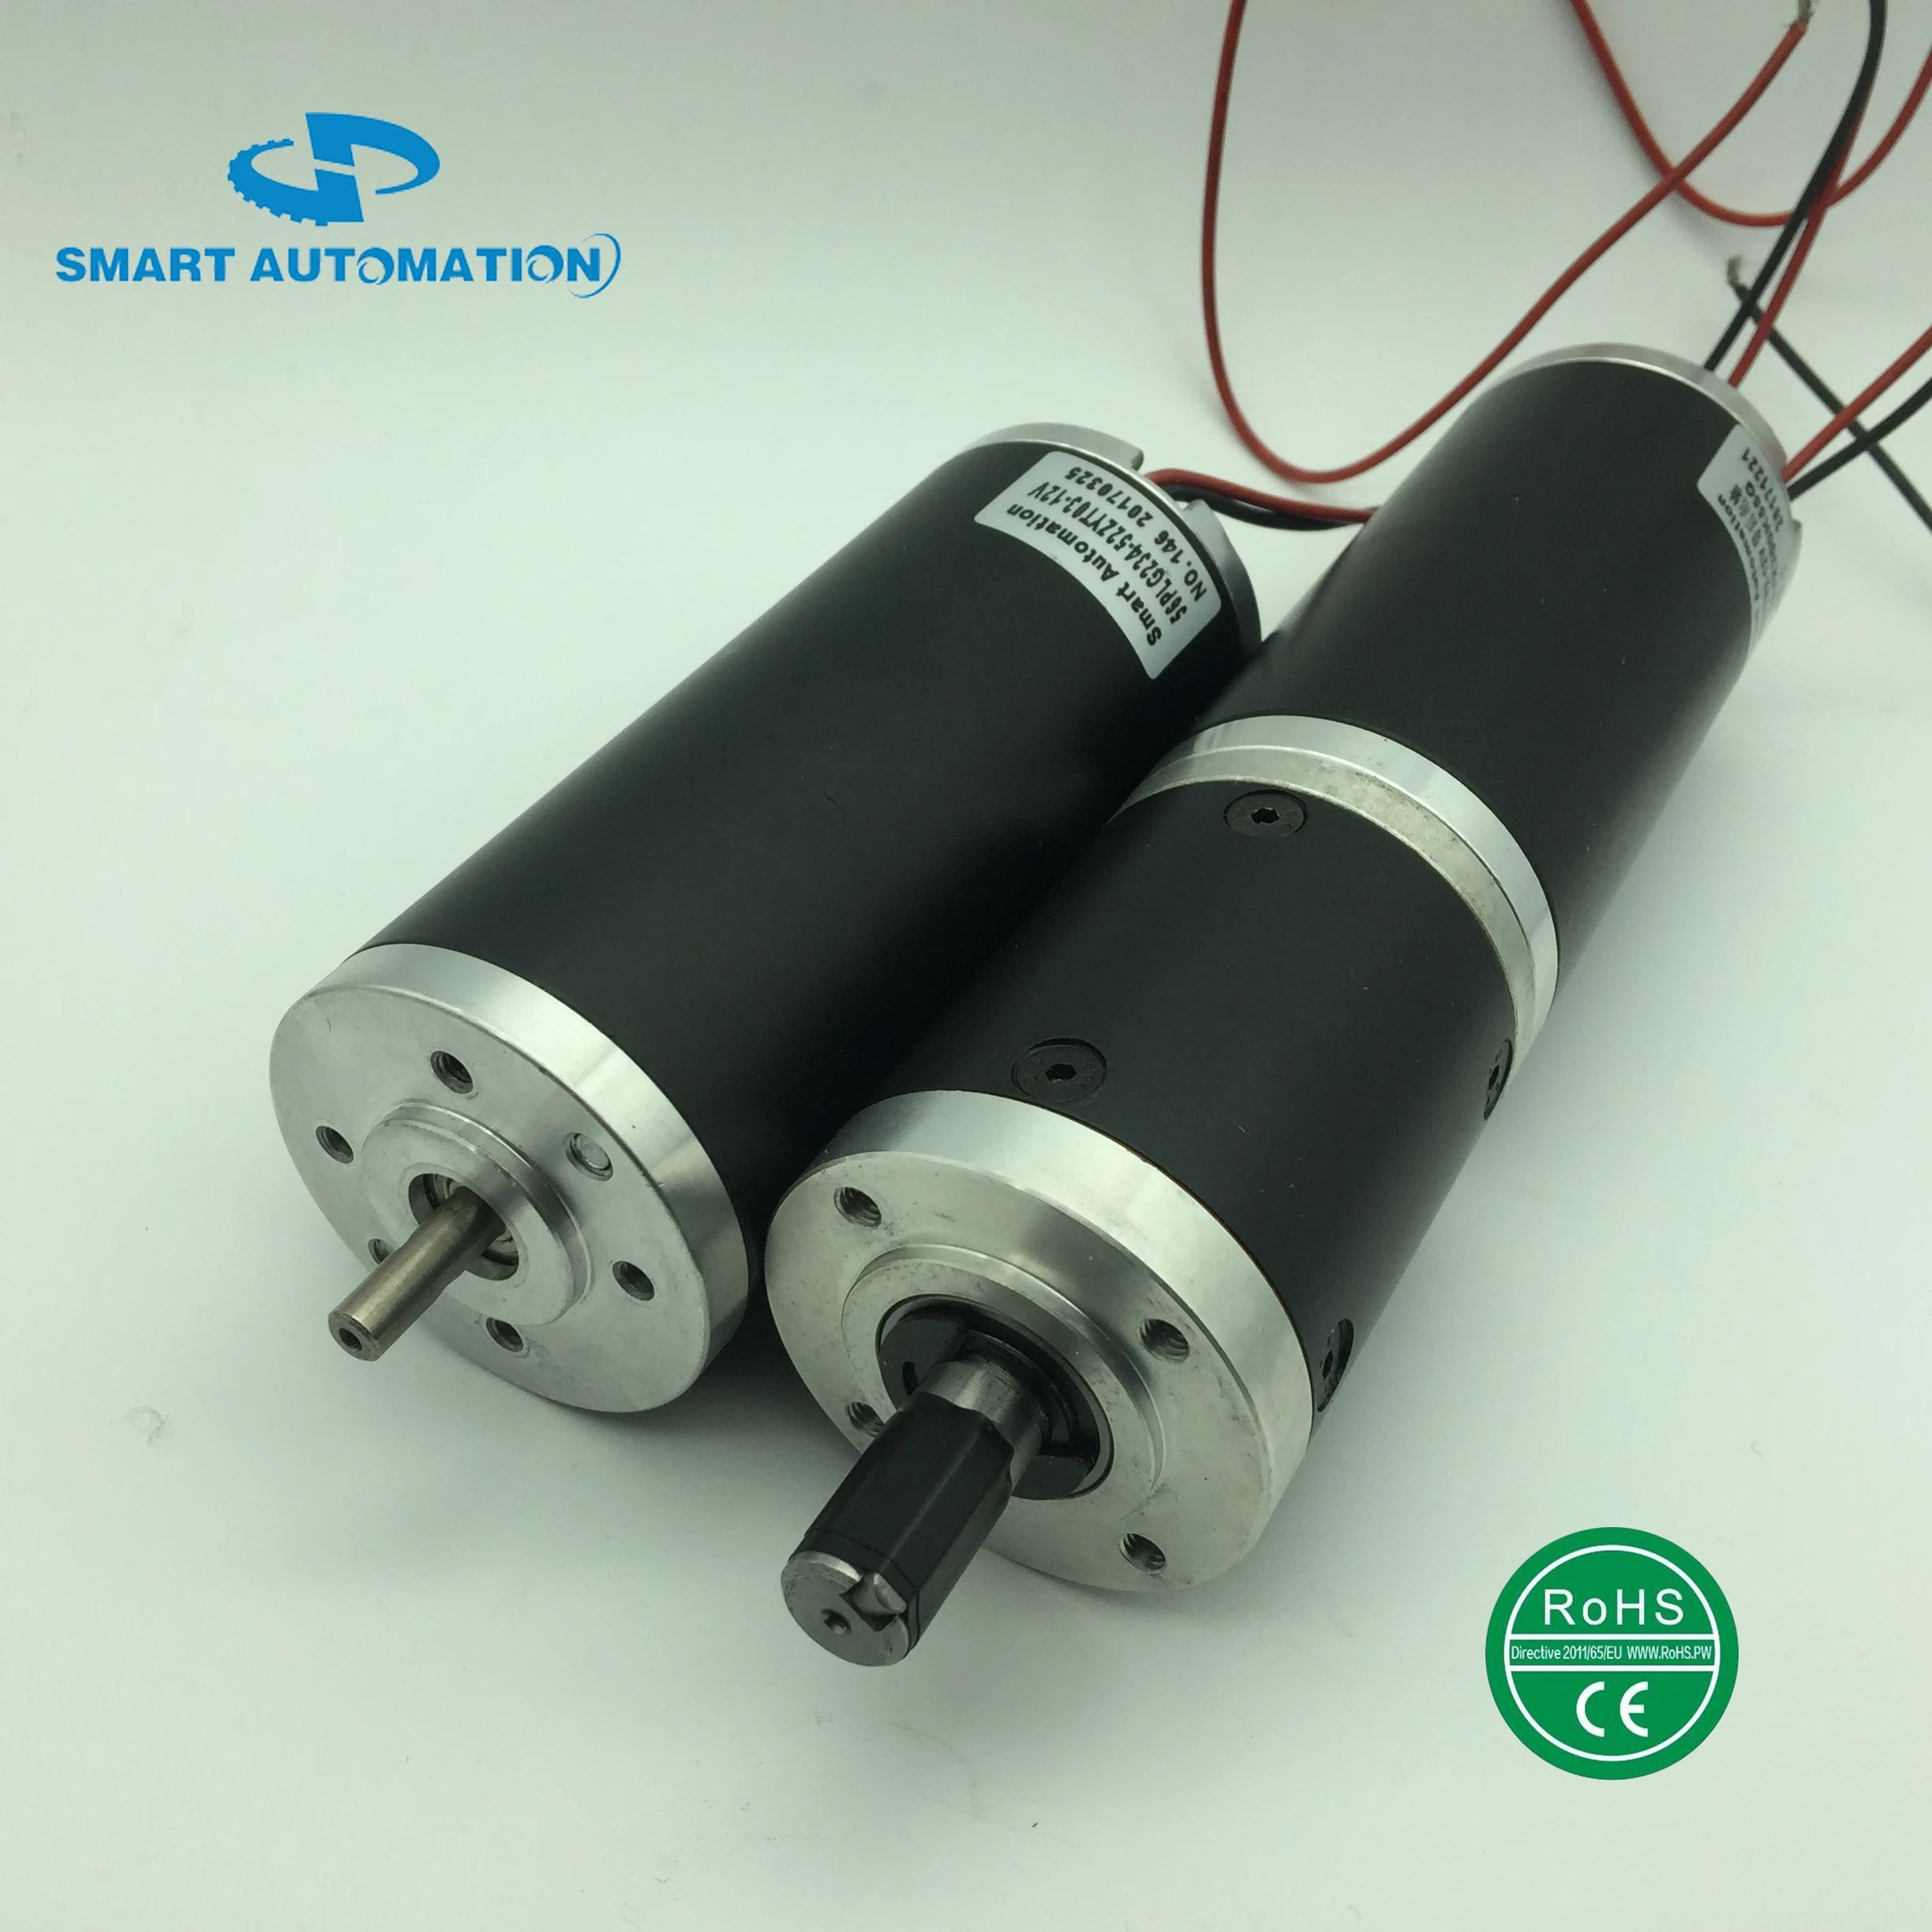 52ZYT series 52mm Brushed Electric Dc Motor Equivalent to Gr53 upto 200w